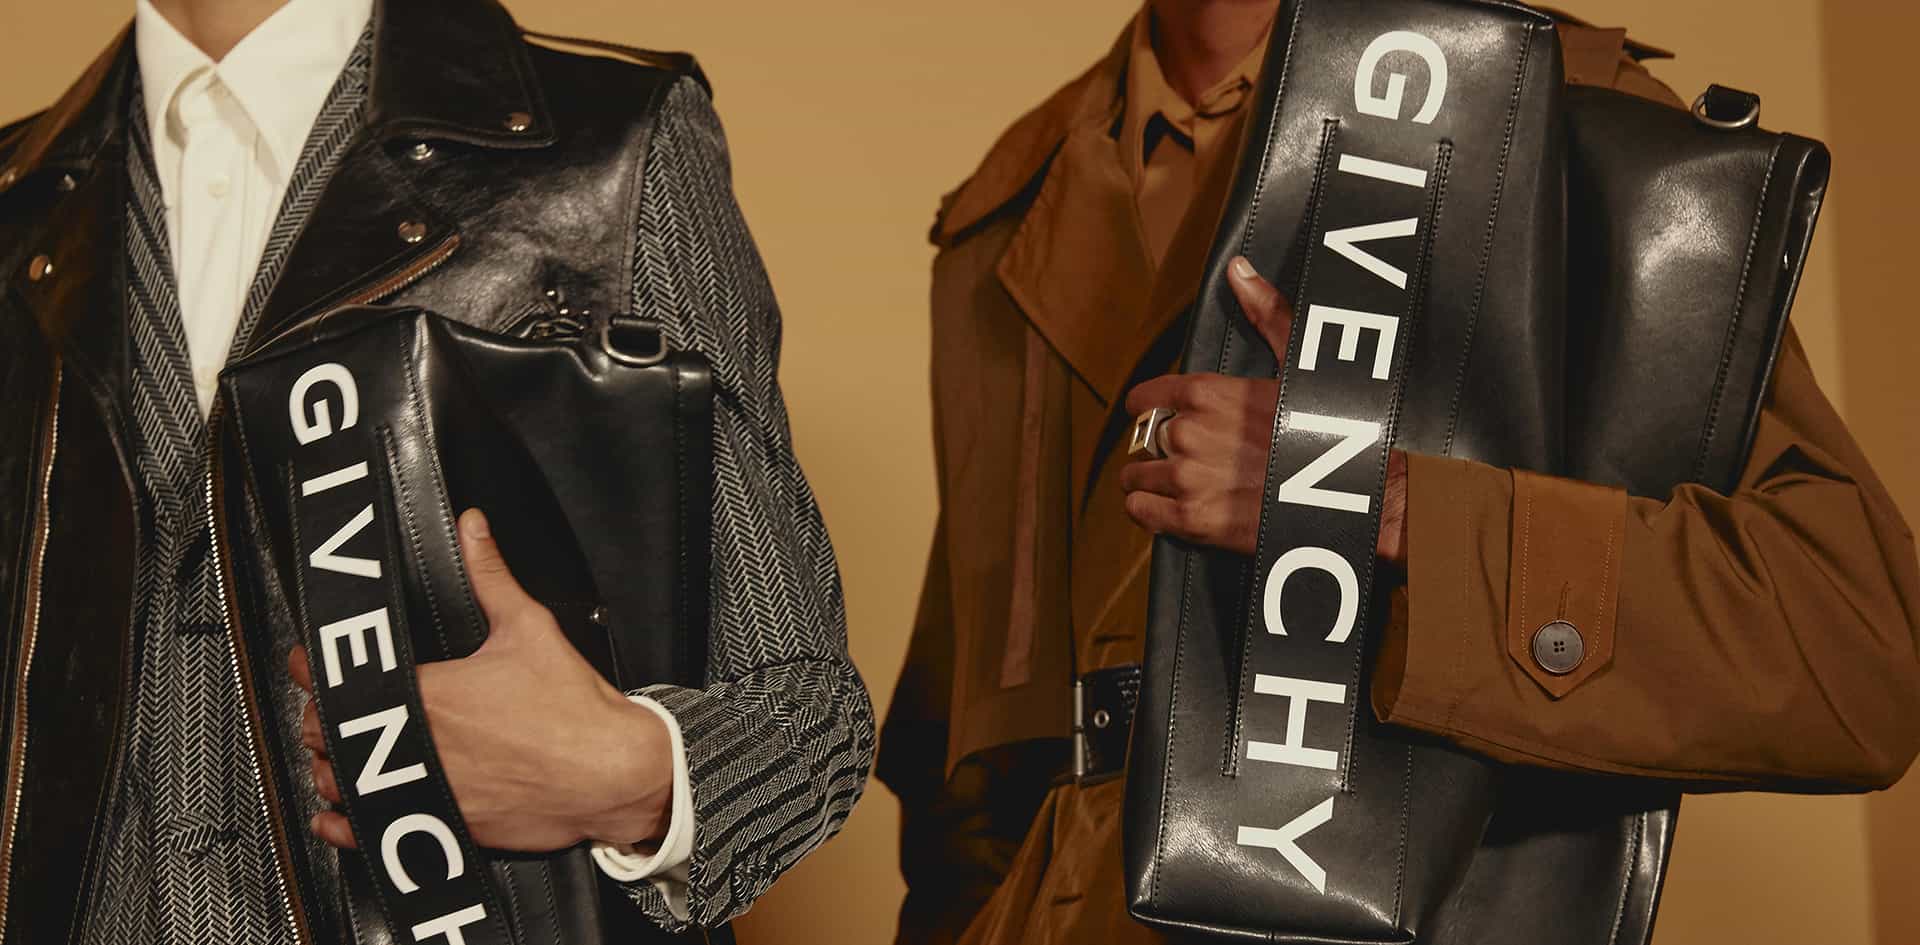 GIVENCHY TO SHOW ITS NEXT MENSWEAR COLLECTION AT PITTI UOMO THIS JUNE ...